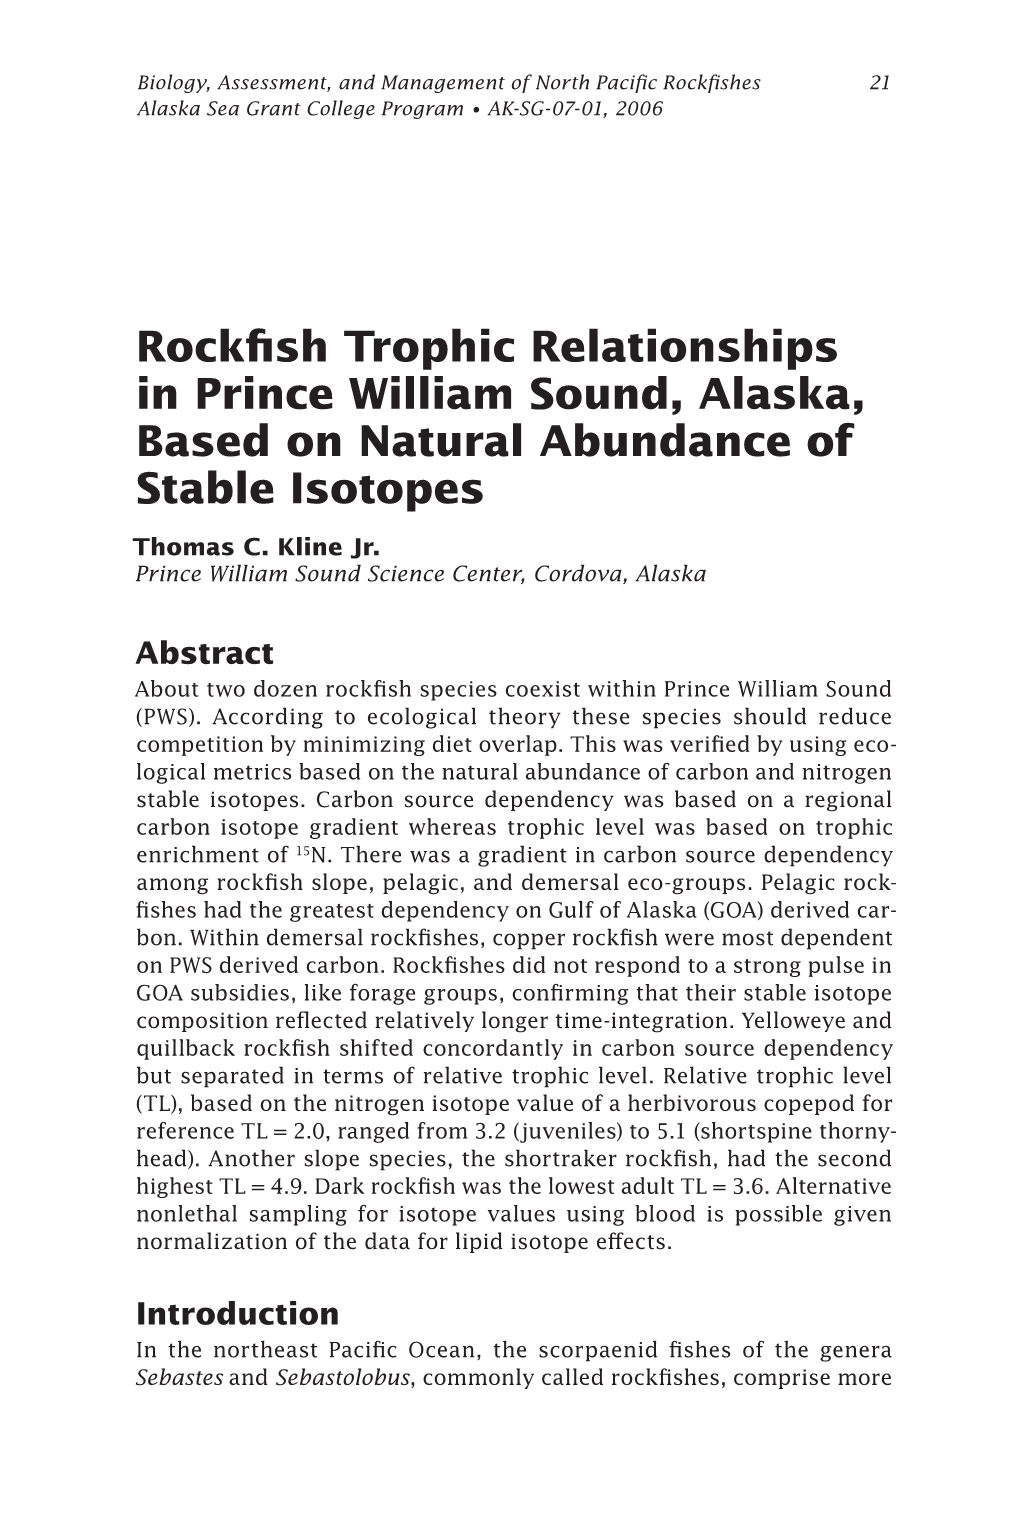 Rockfish Trophic Relationships in Prince William Sound, Alaska, Based on Natural Abundance of Stable Isotopes Thomas C